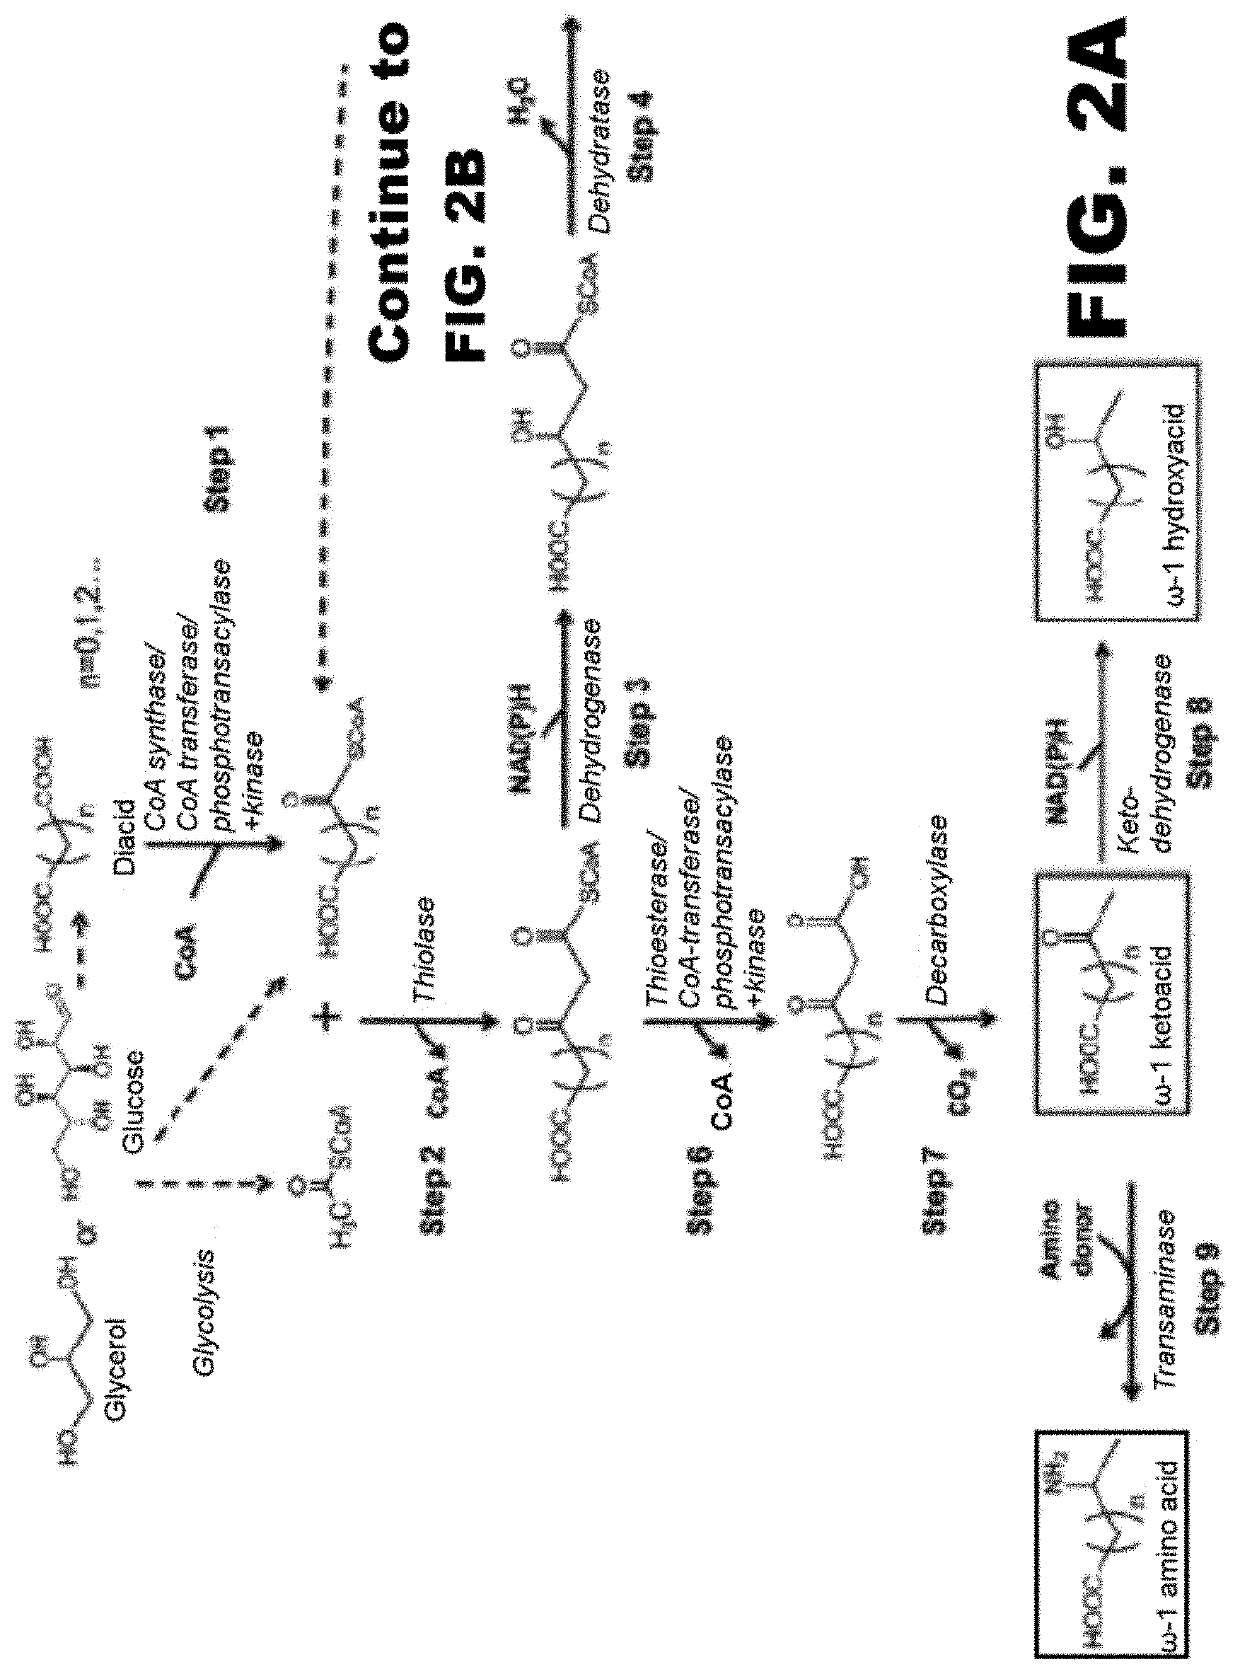 Synthesis of omega functionalized products